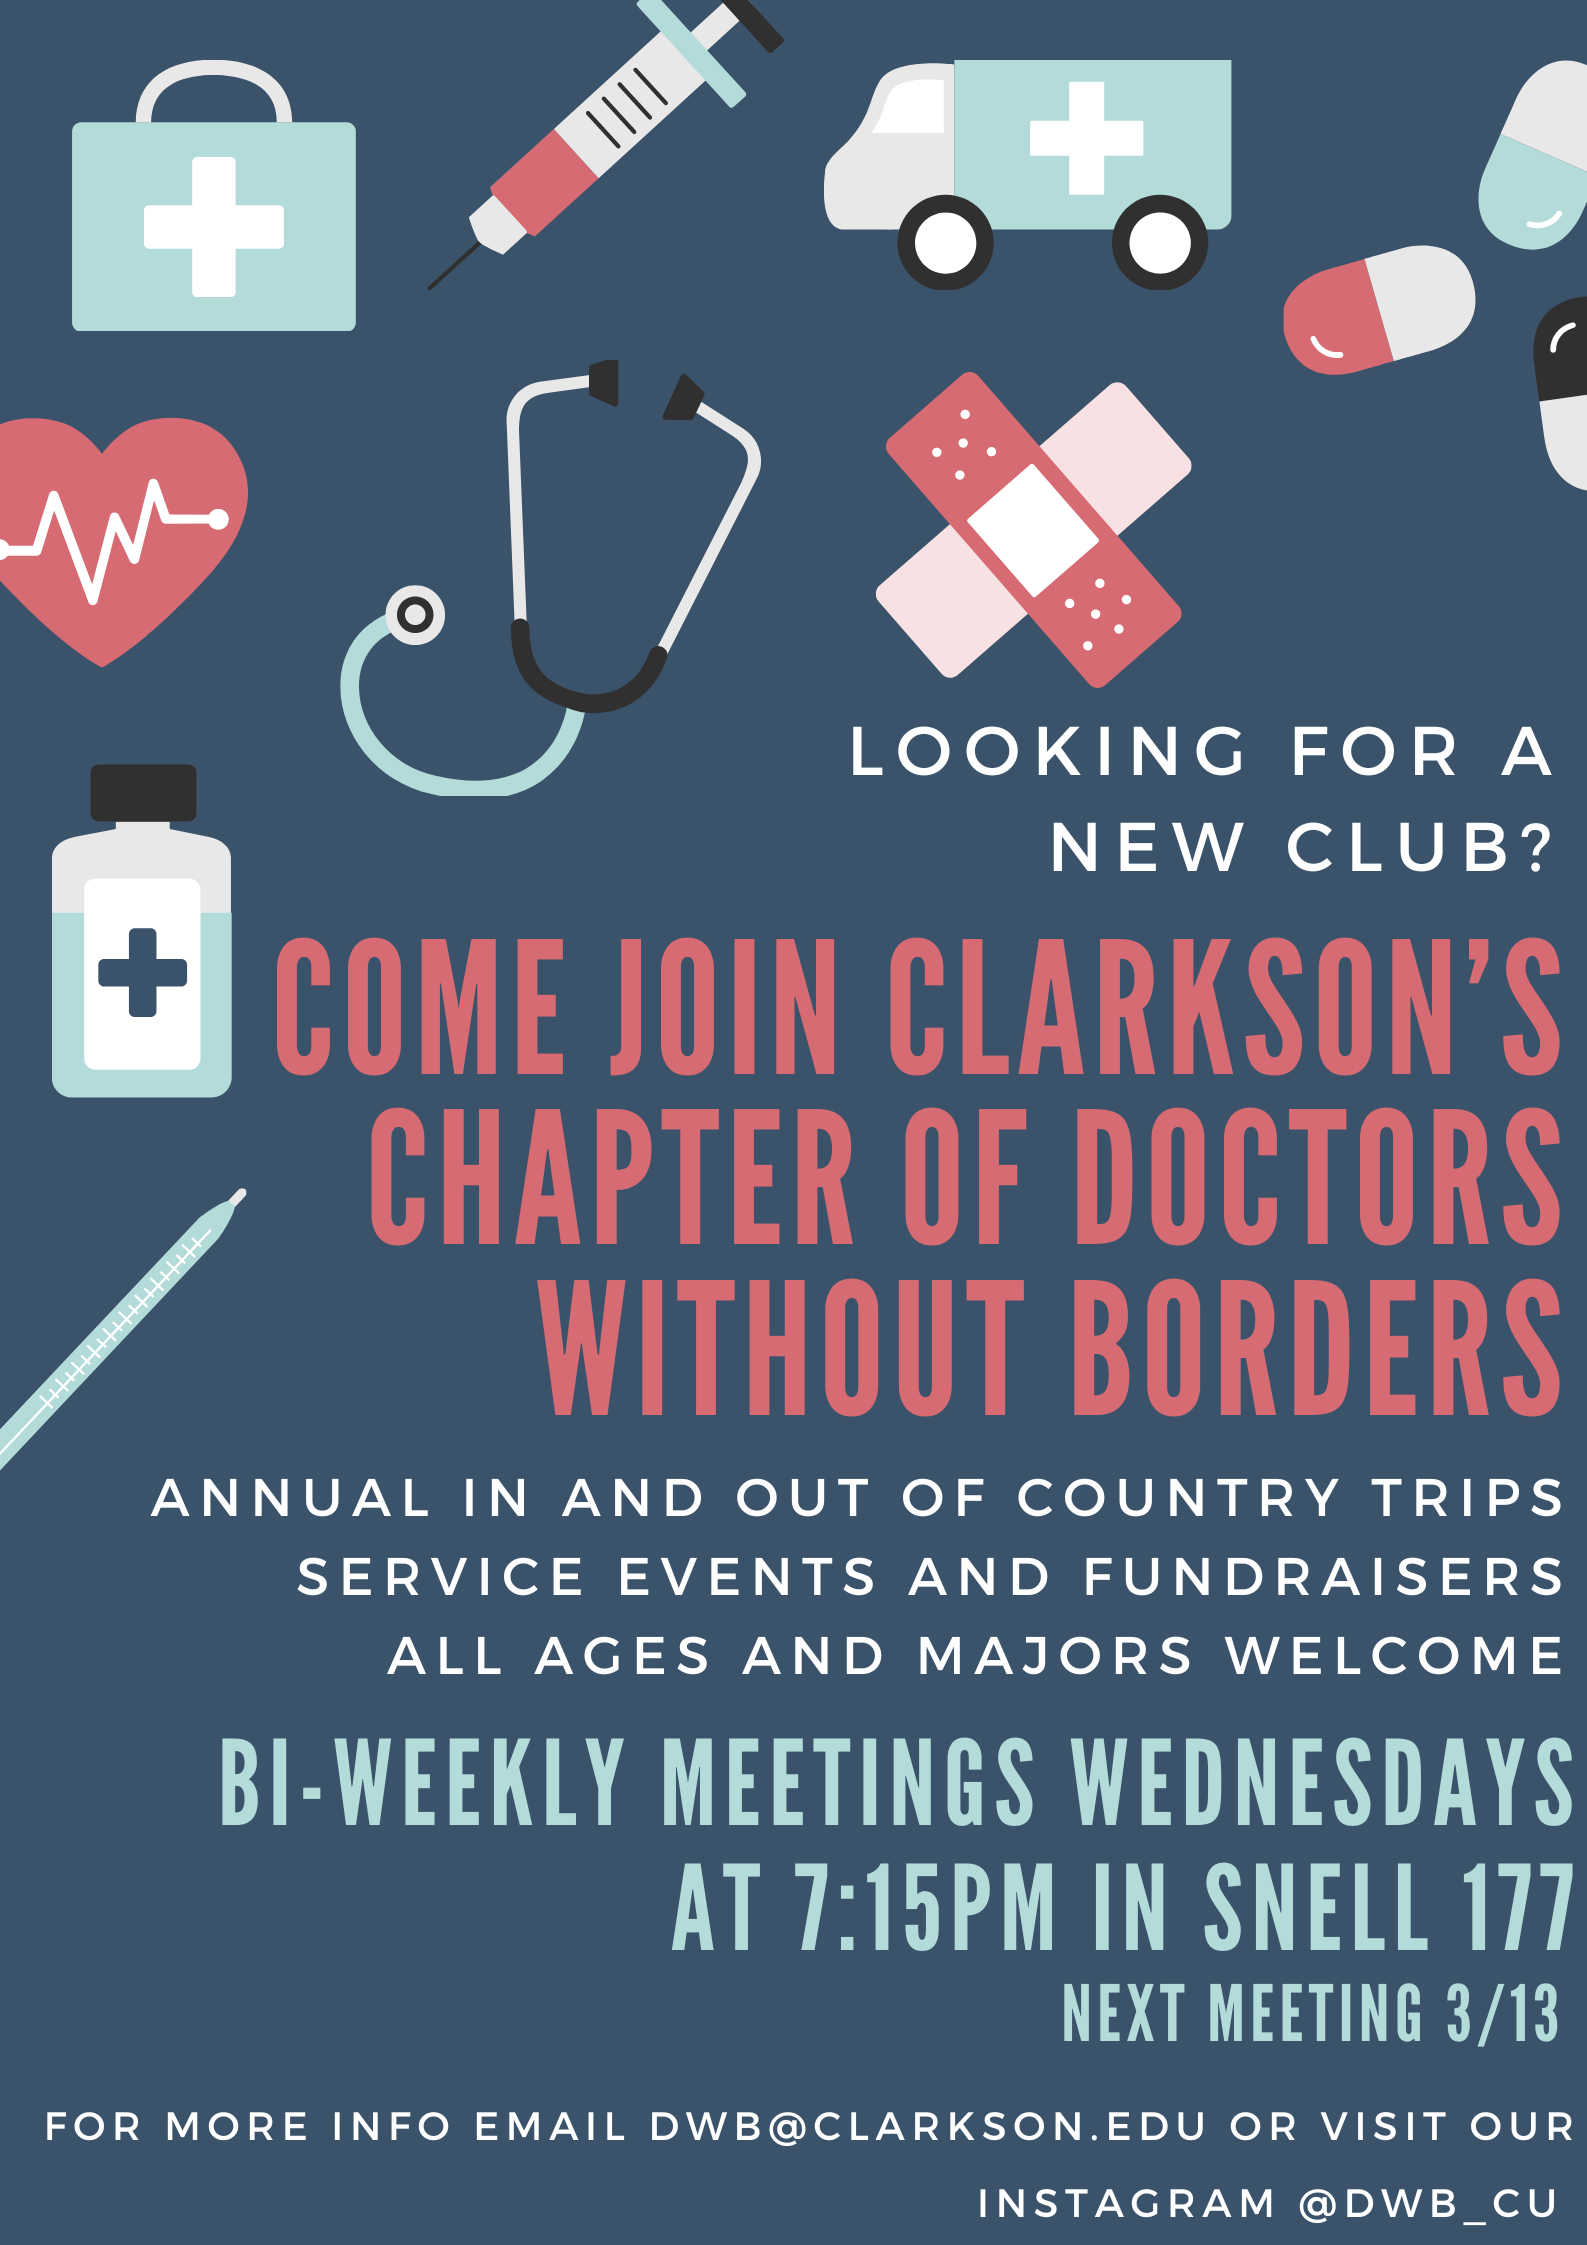 Are you looking for a new club? Clarkson University's chapter of Doctors Without Borders hosts our meetings bi-weekly on Wednesdays at 7:15pm in Snell 177! Our next meeting will be 3/13! We host annual in and out of country service trips, service events, and fundraisers! All years and majors are welcome! For more information, email dwb@clarkson.edu or visit our instagram @dwb_cu